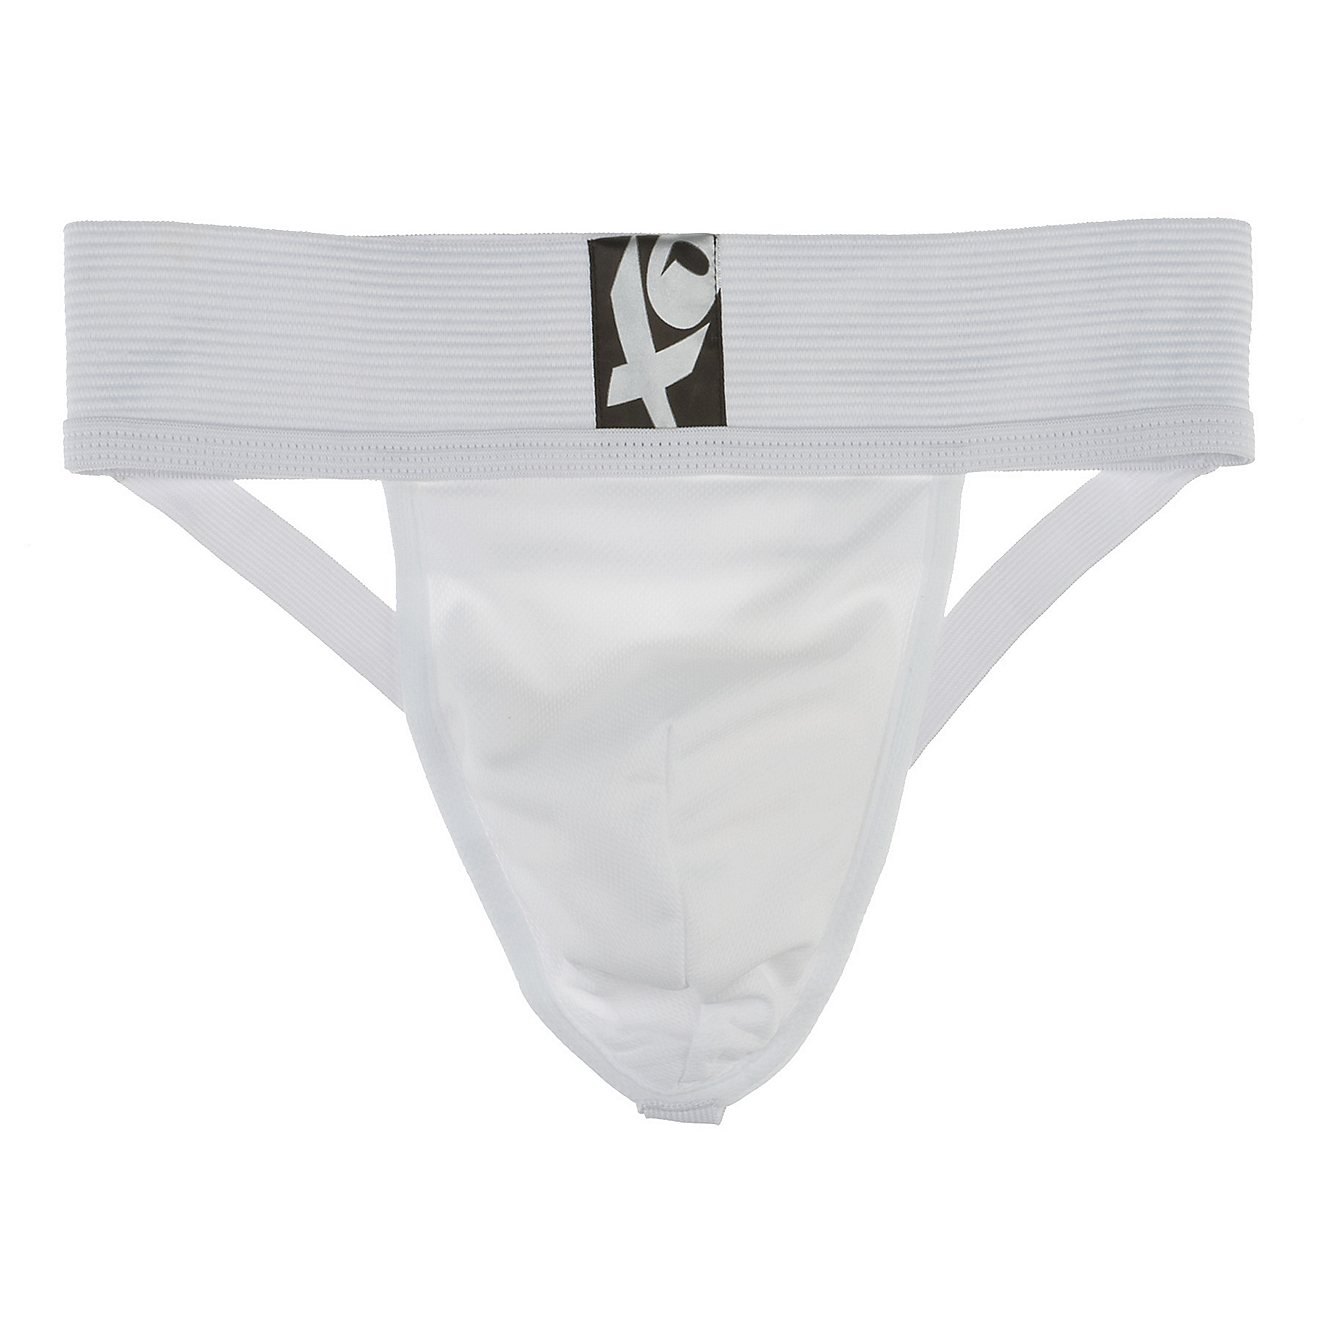 XO Men's ProSupporter Athletic Supporter                                                                                         - view number 1